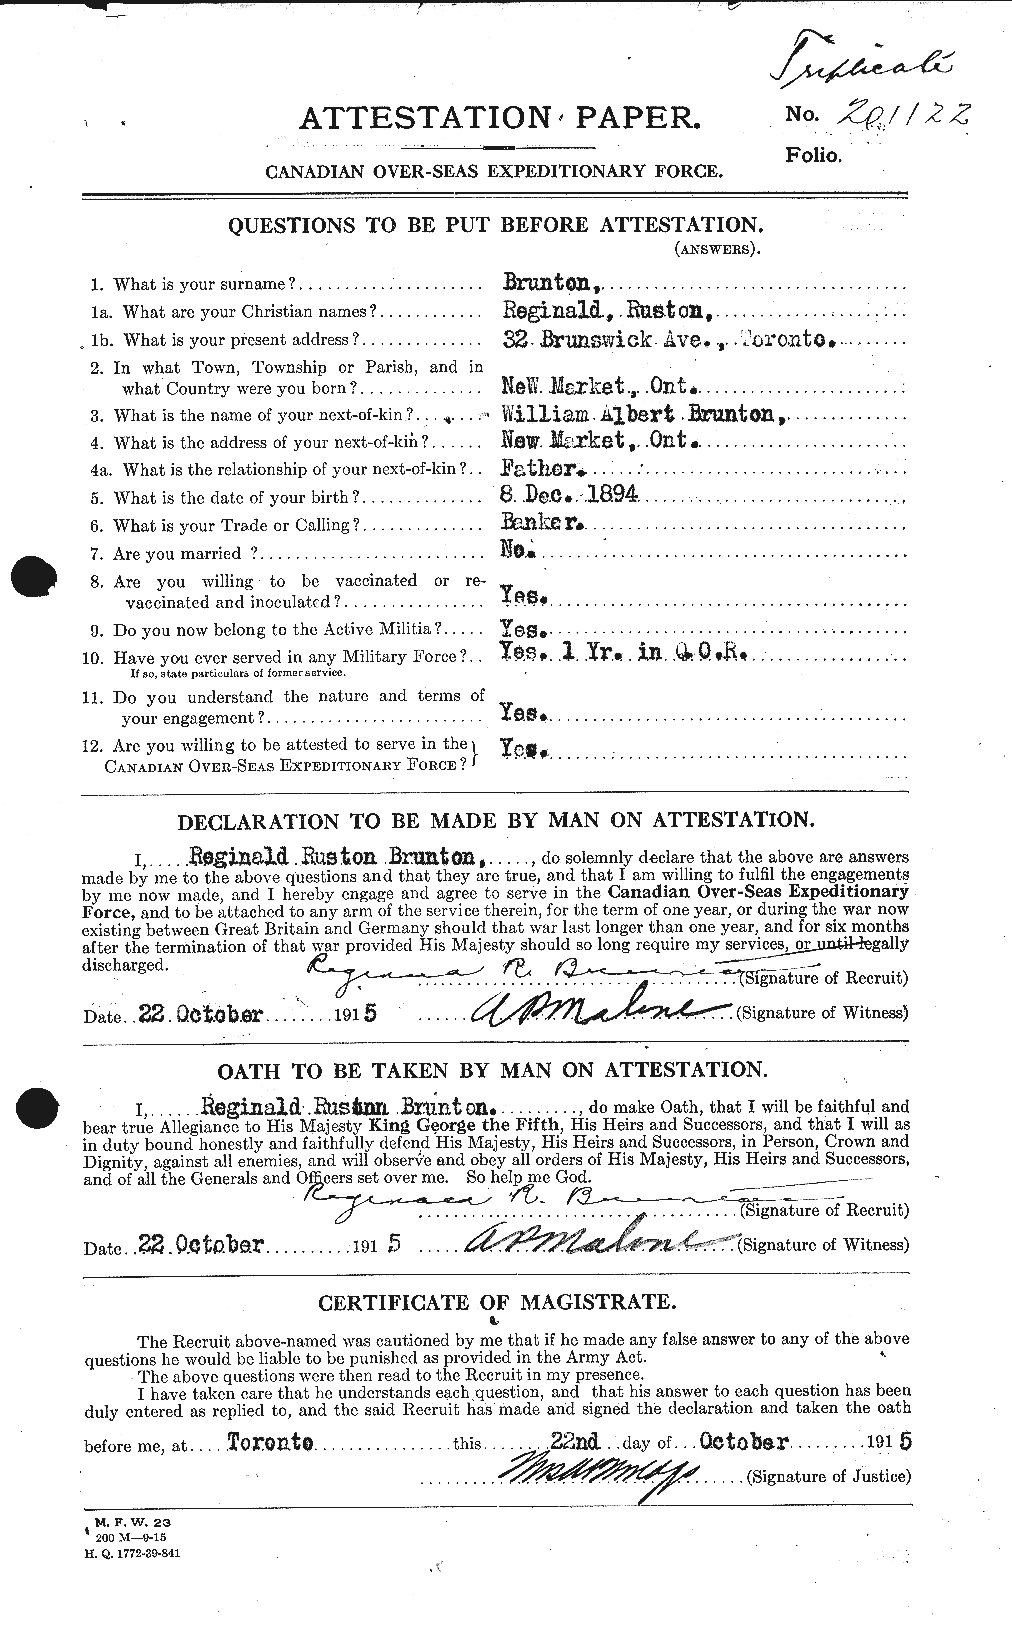 Personnel Records of the First World War - CEF 268644a